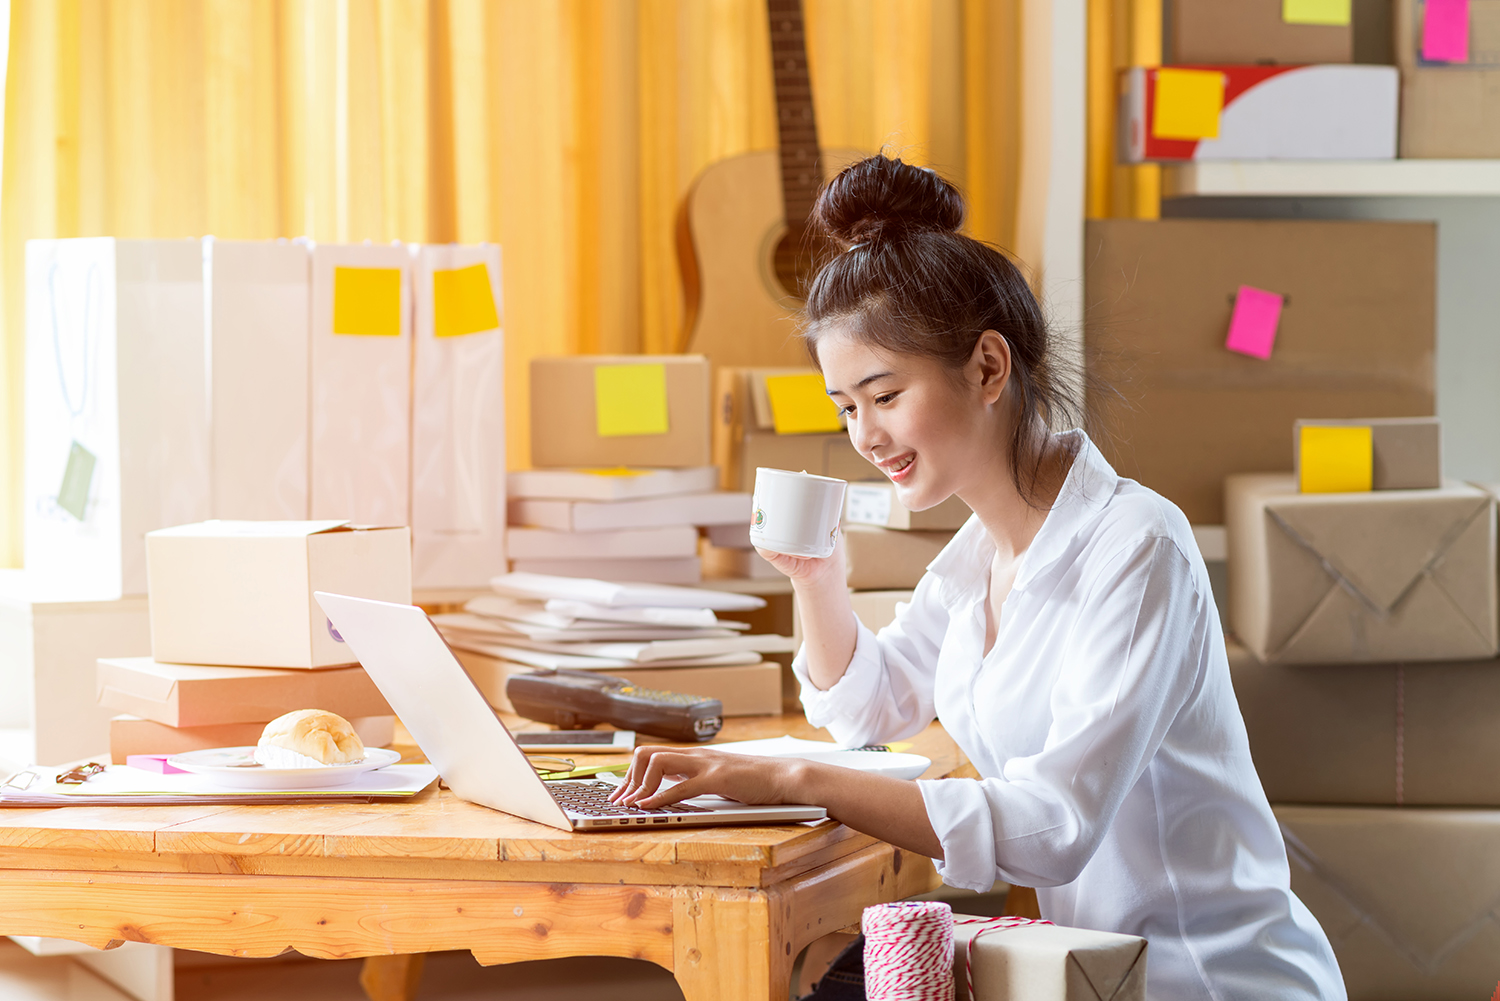 Smiling East Asian female SME working at desk with coffee